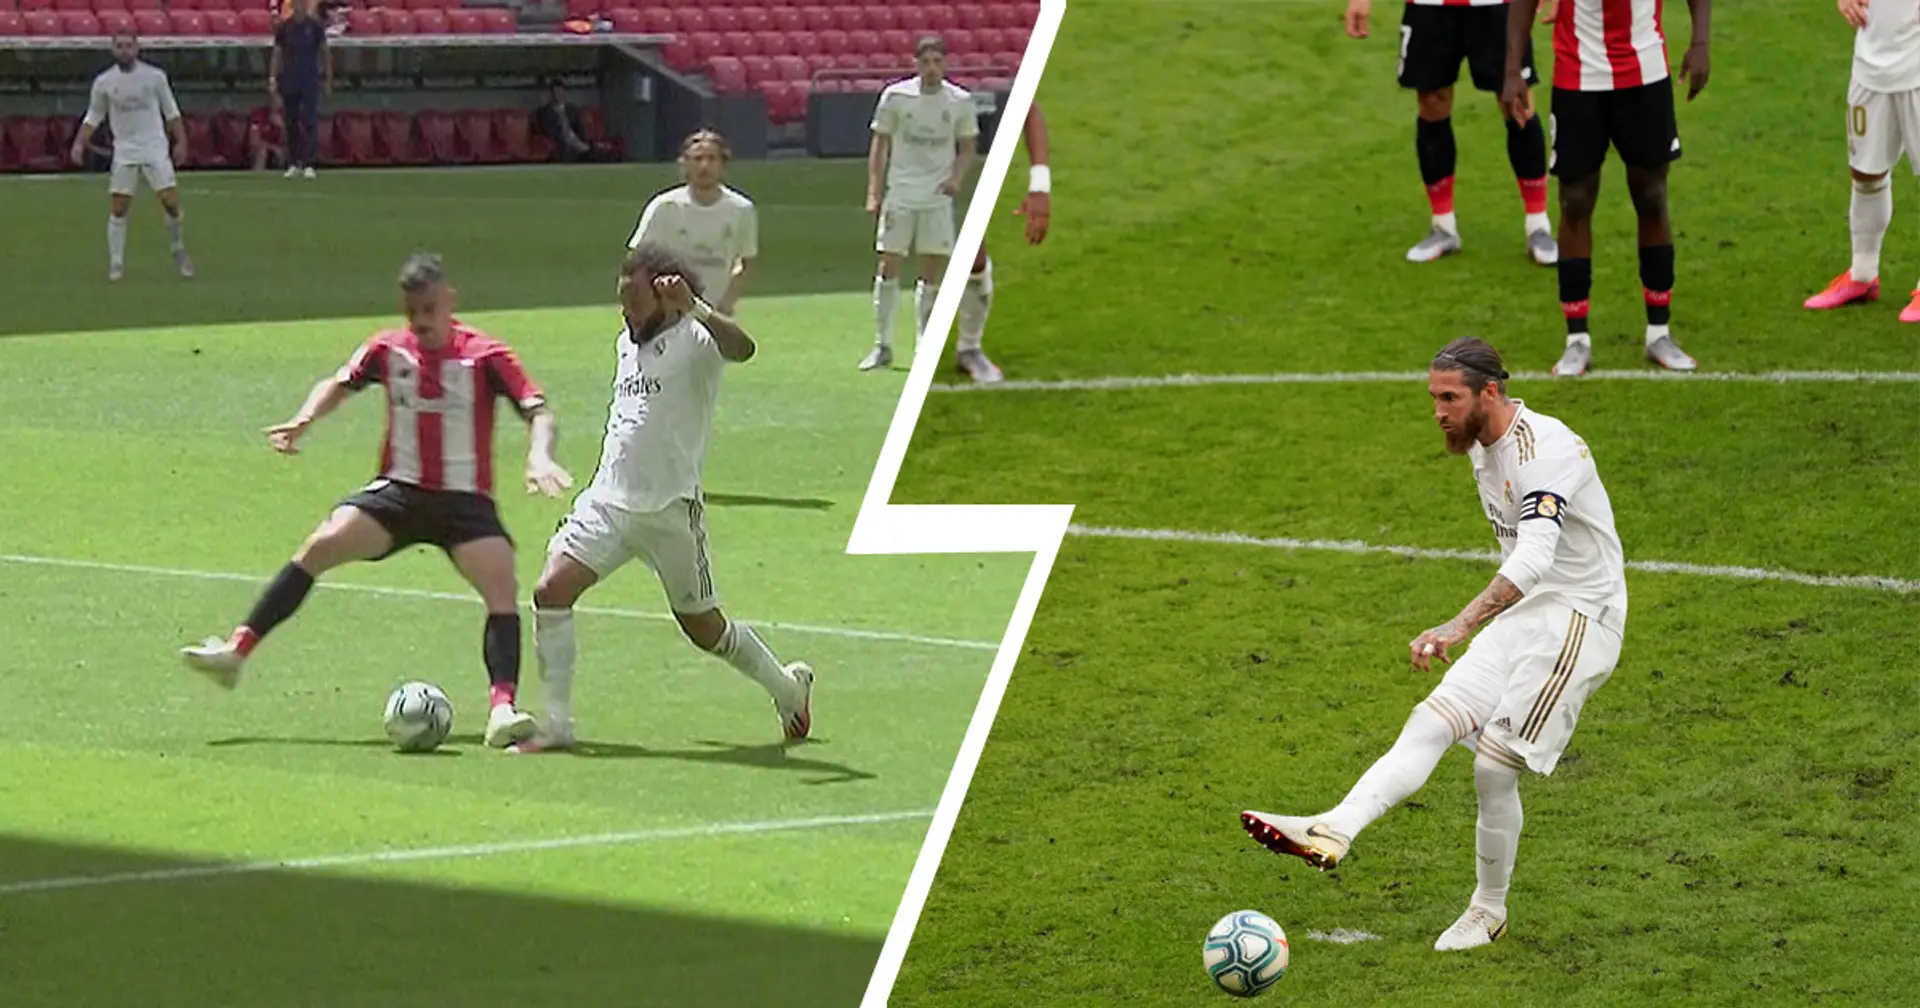 'That penalty needed to be awarded': Refereeing expert rules out any controversy surrounding tackle on Marcelo